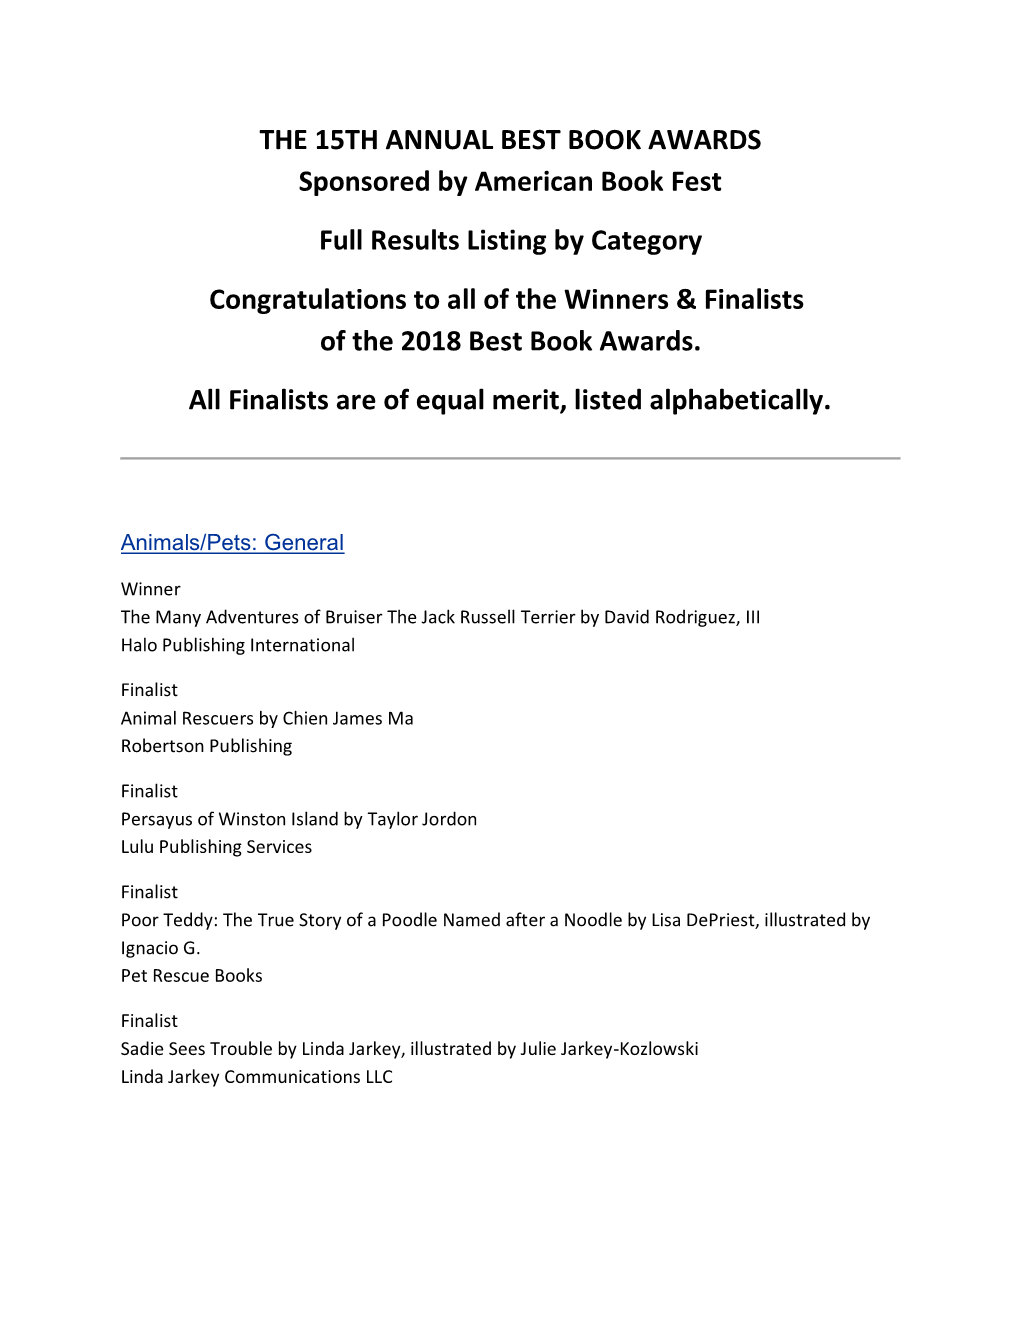 THE 15TH ANNUAL BEST BOOK AWARDS Sponsored by American